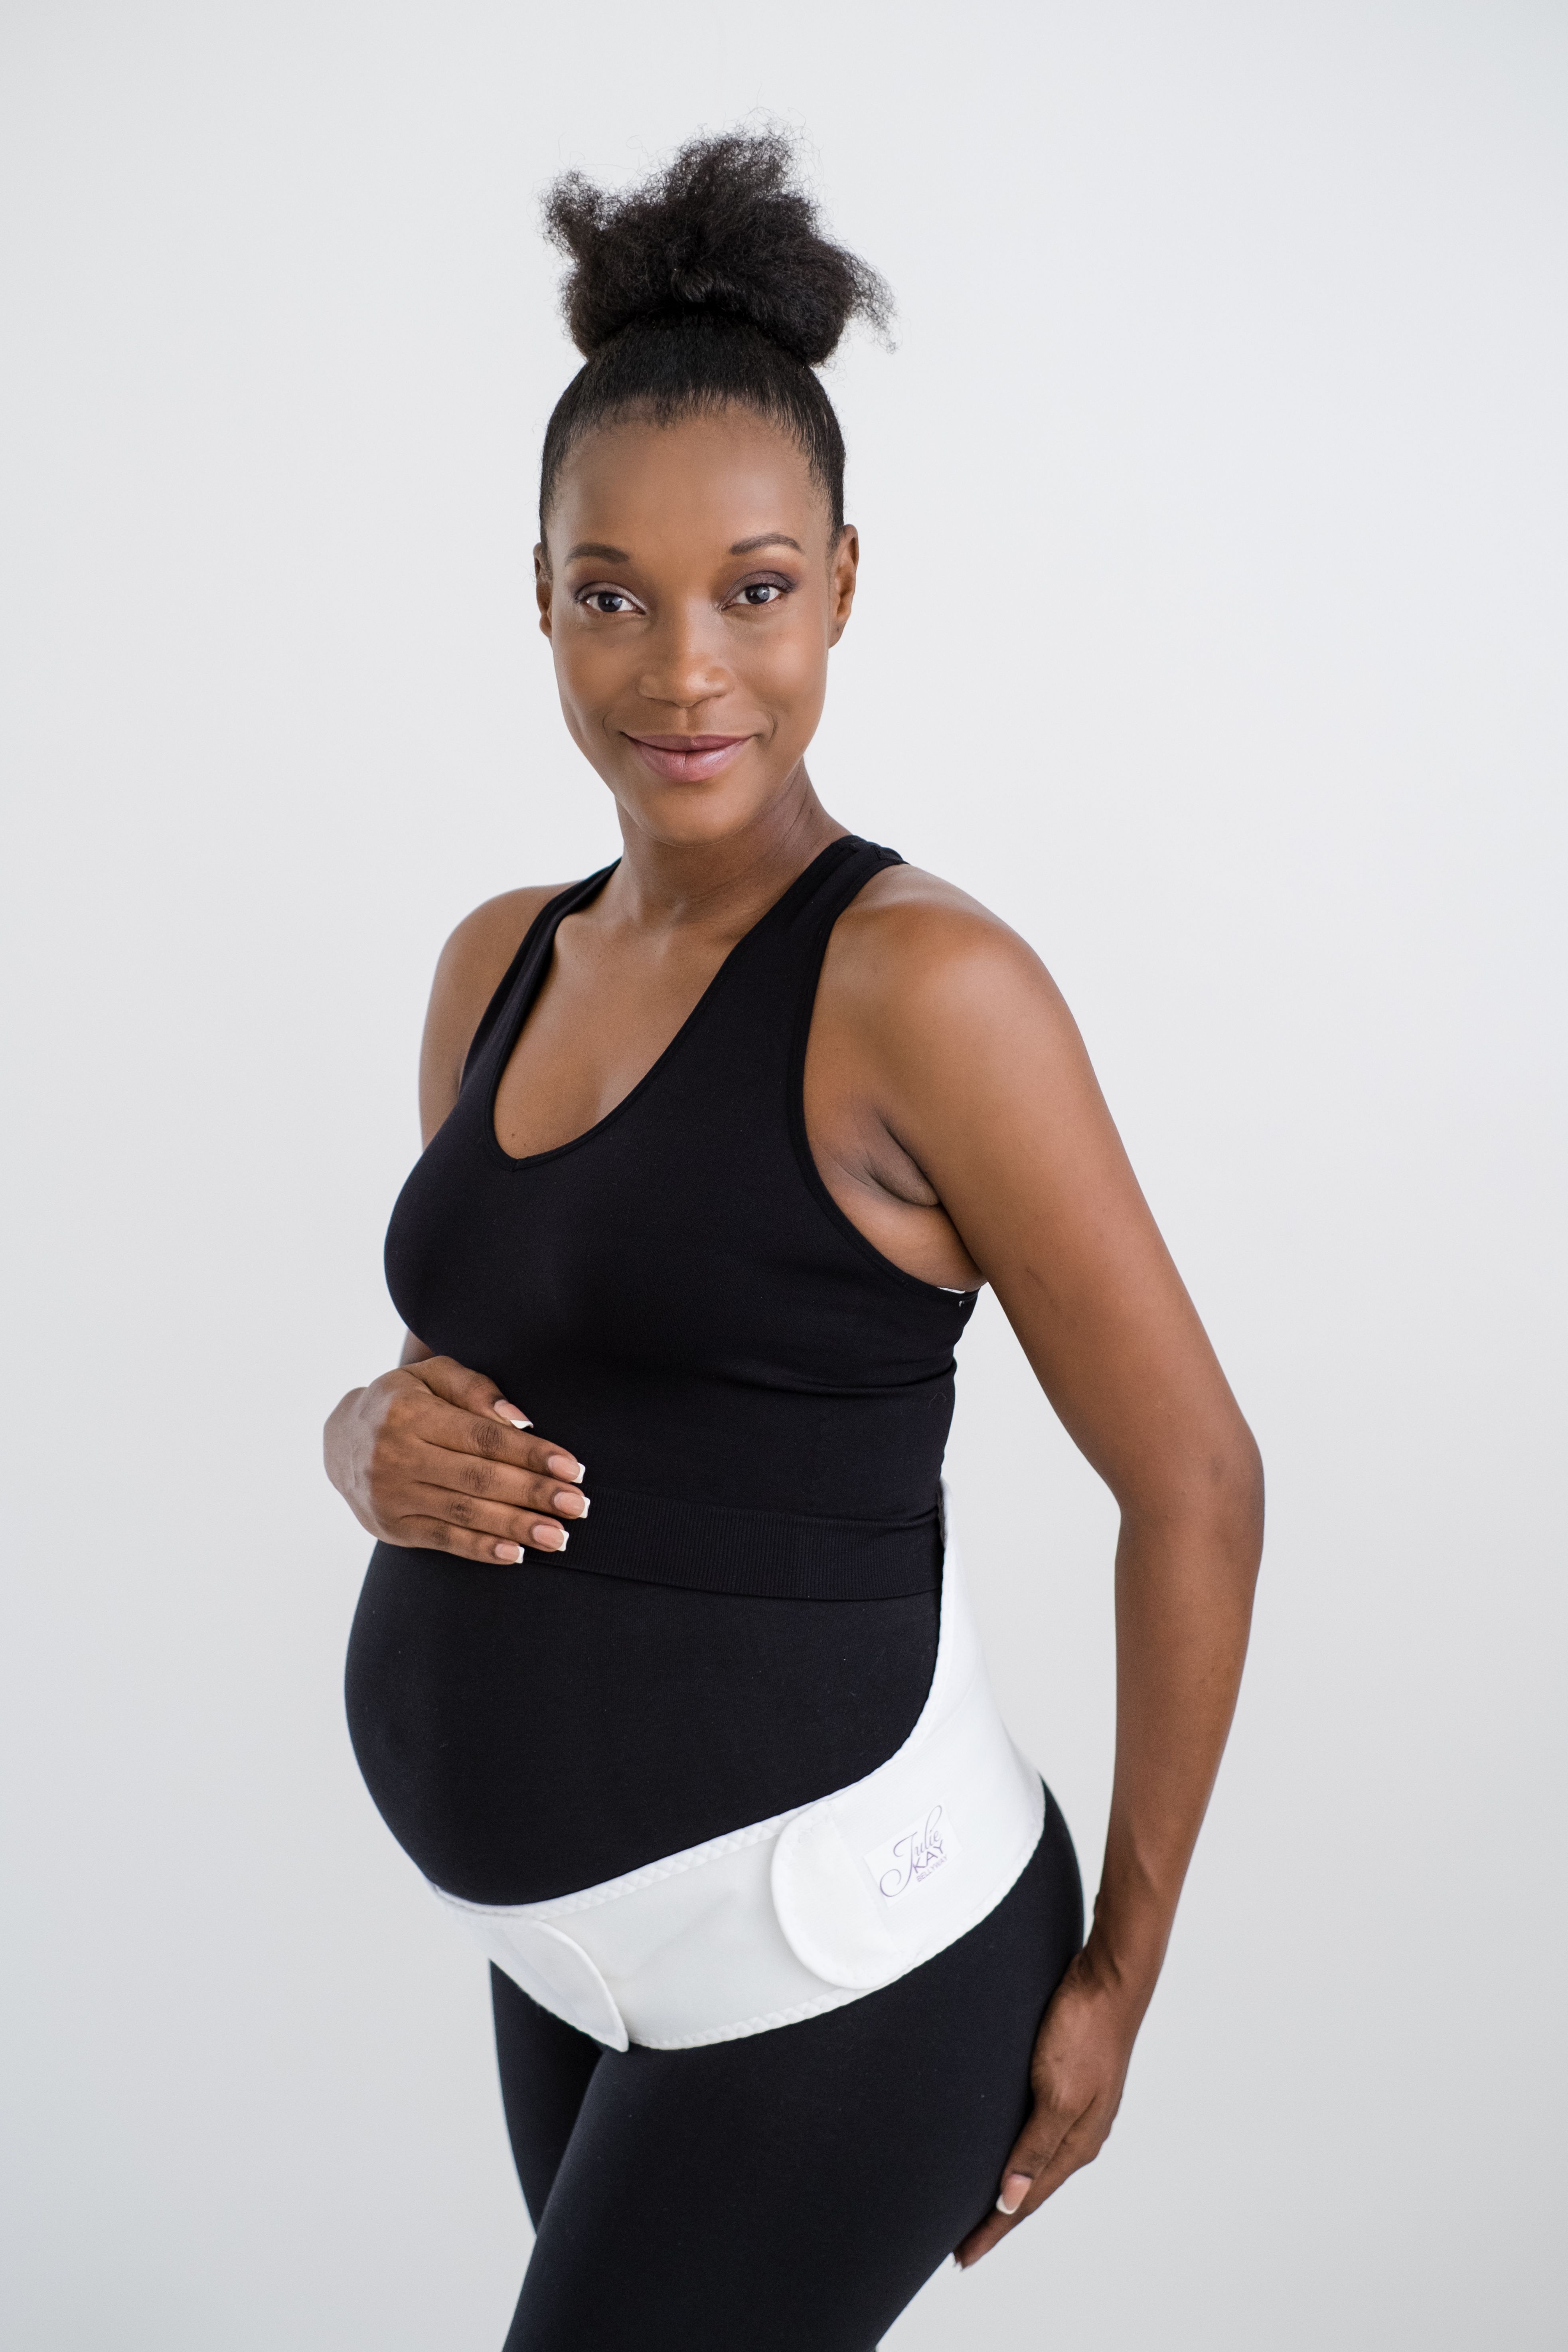 Maternity Compression Tights – Belly Bandit